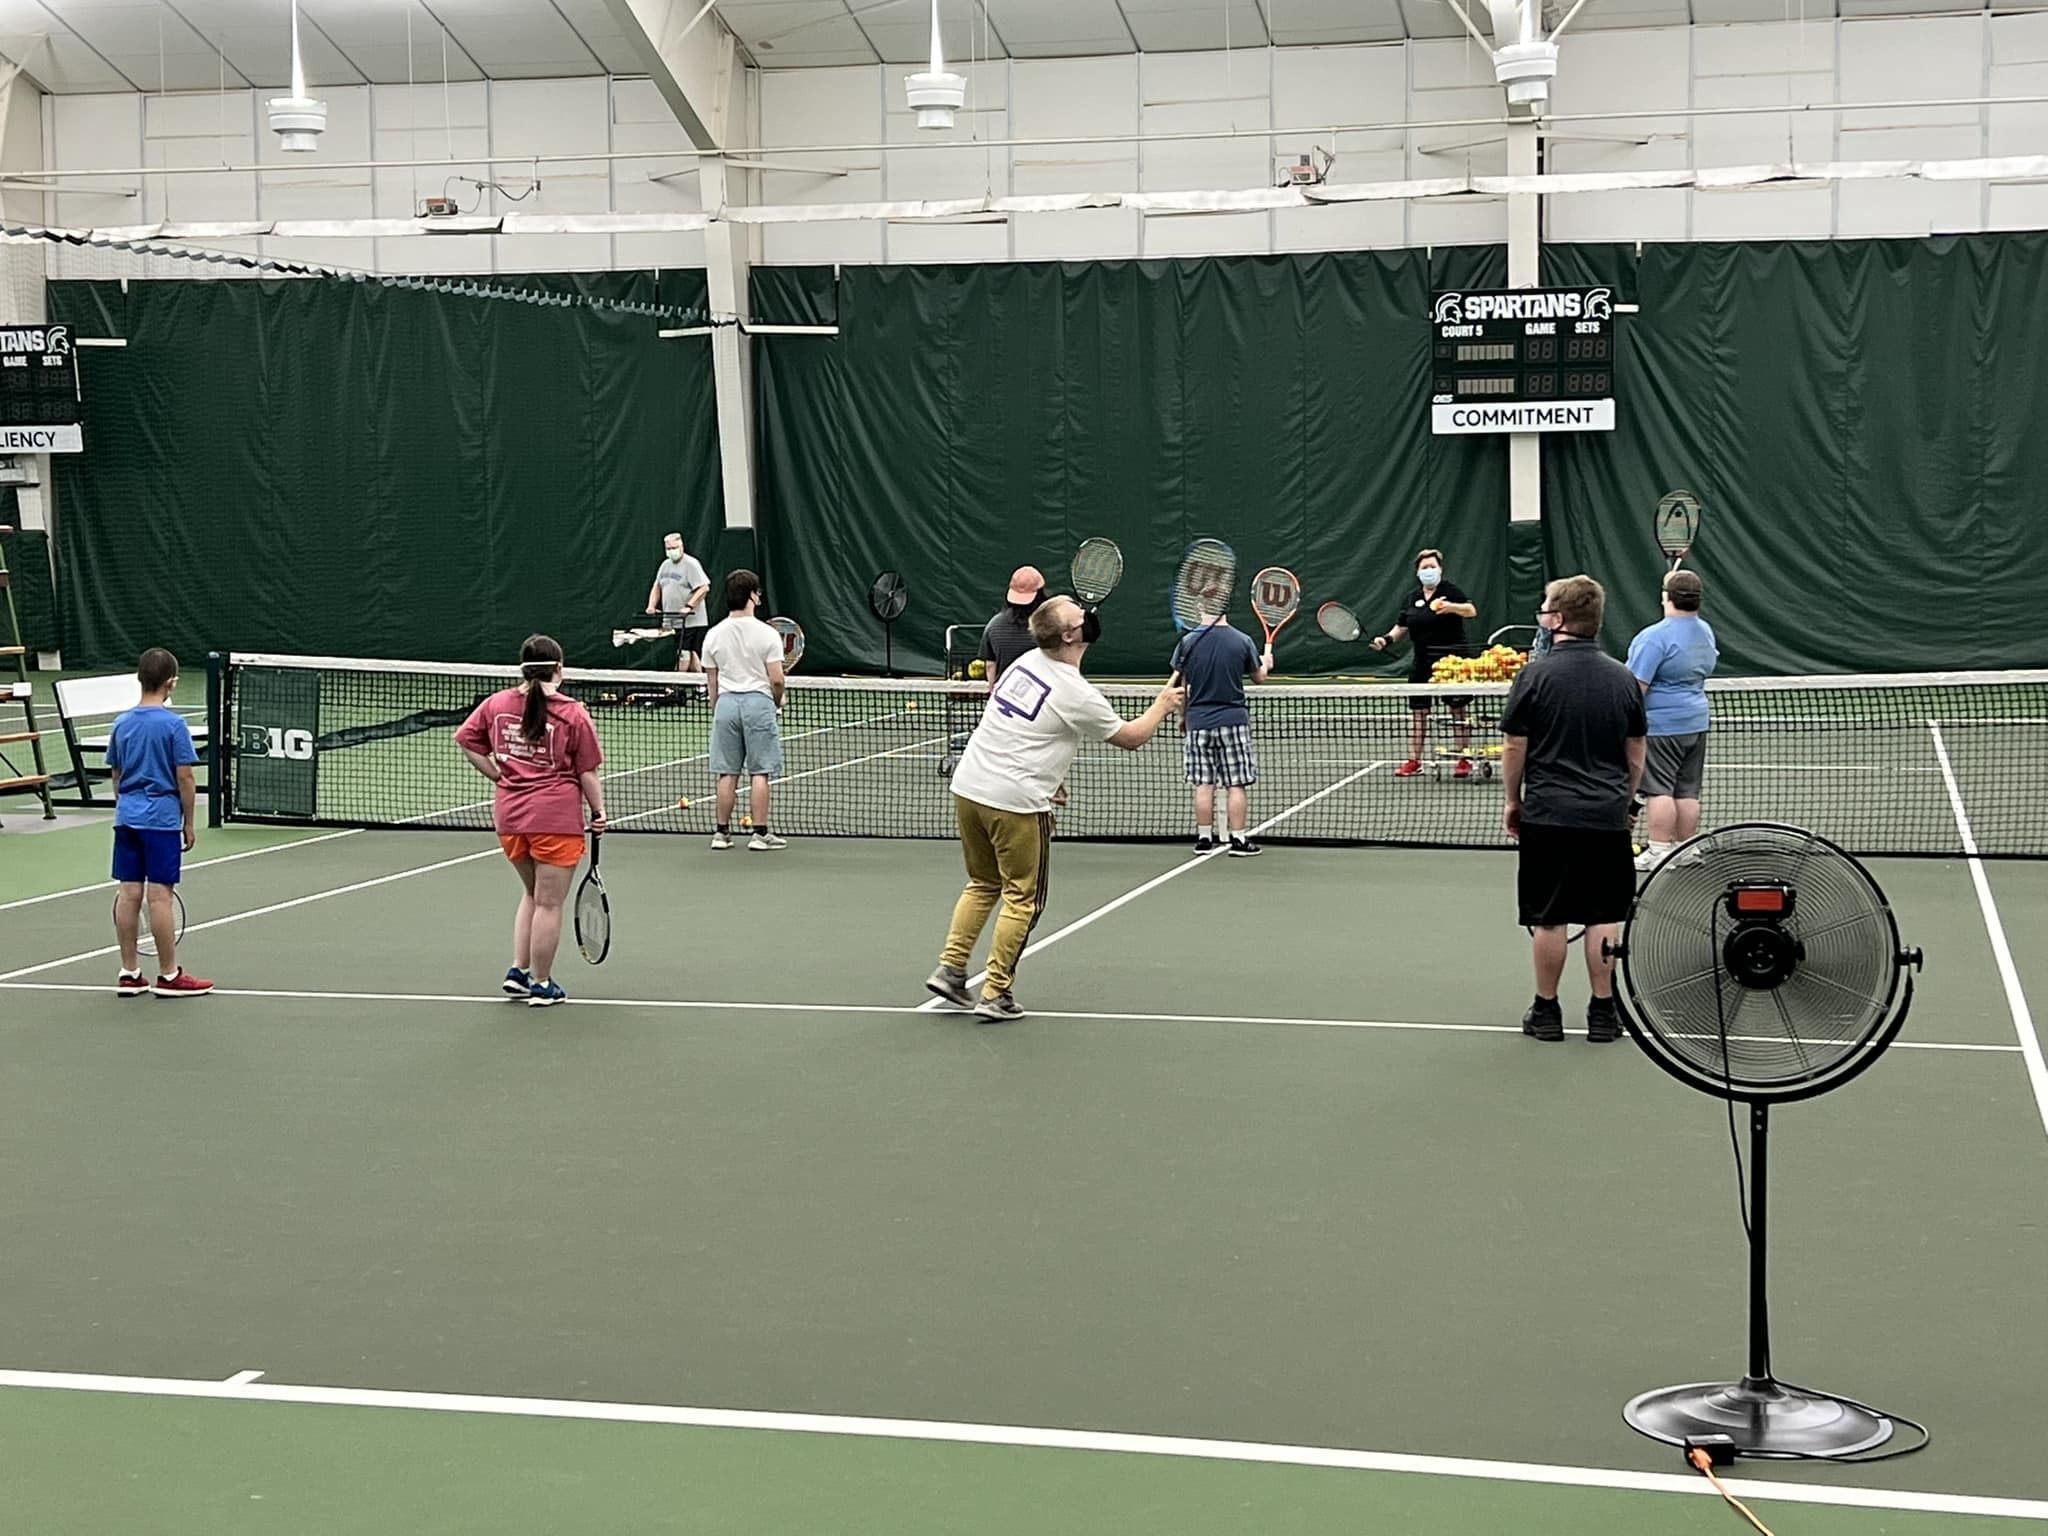 A group of tennis players with Down syndrome participating in class.